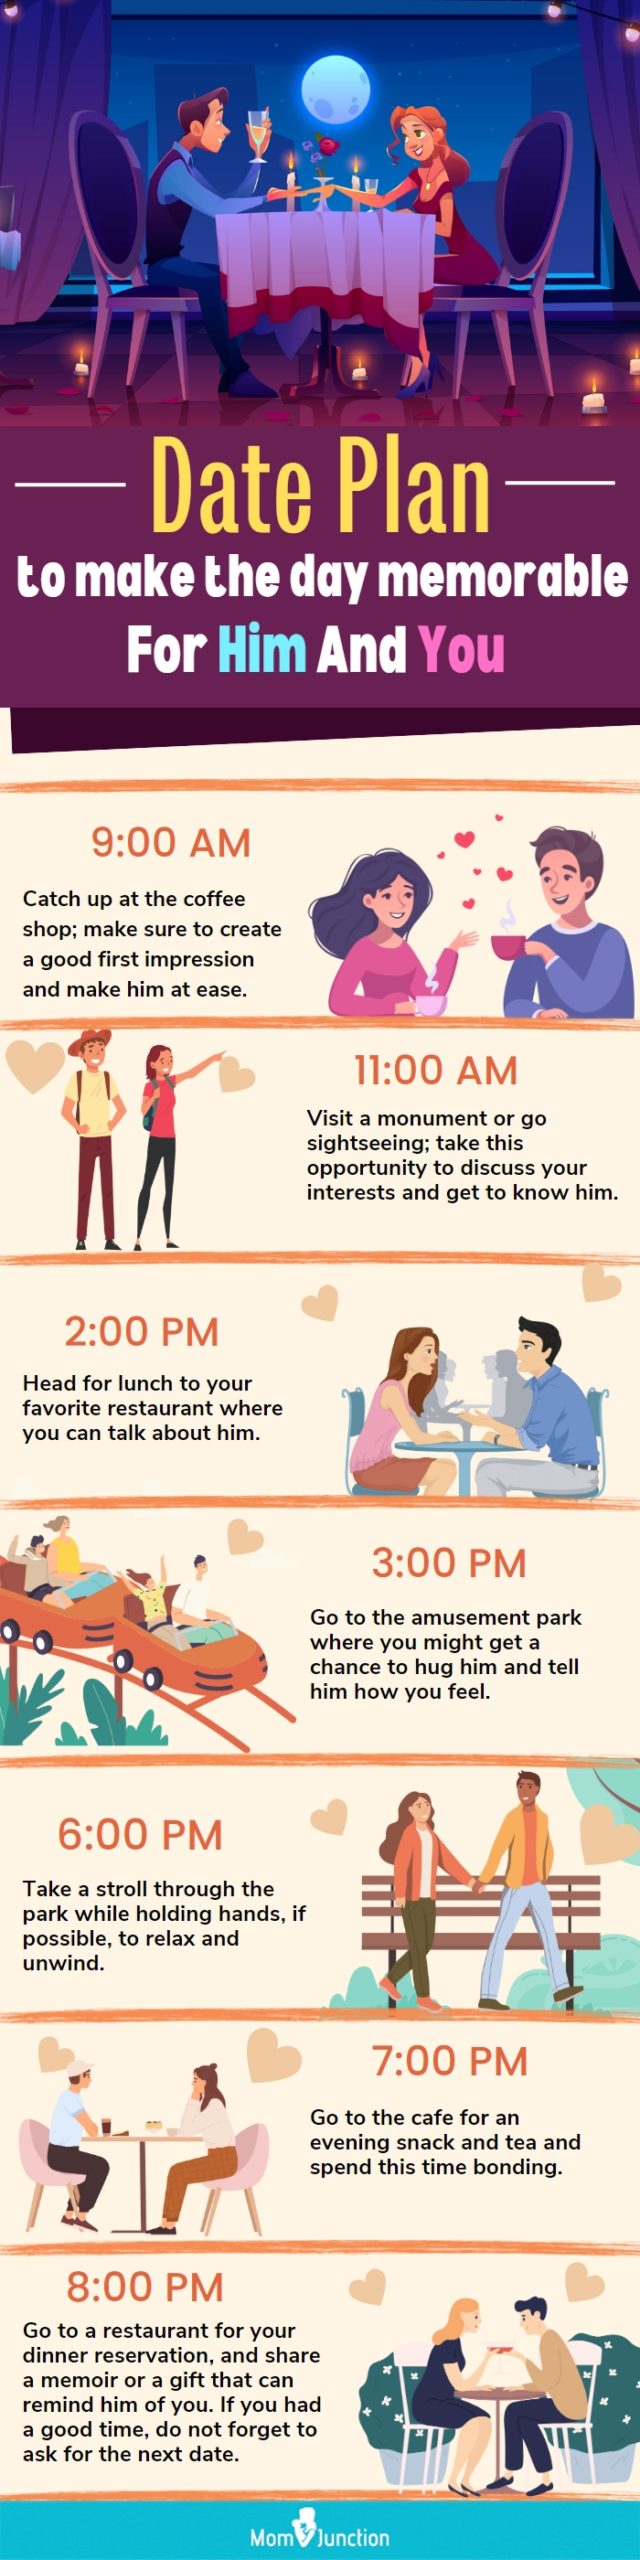 12 Simple Ways to Ask Someone for a Video Date - wikiHow